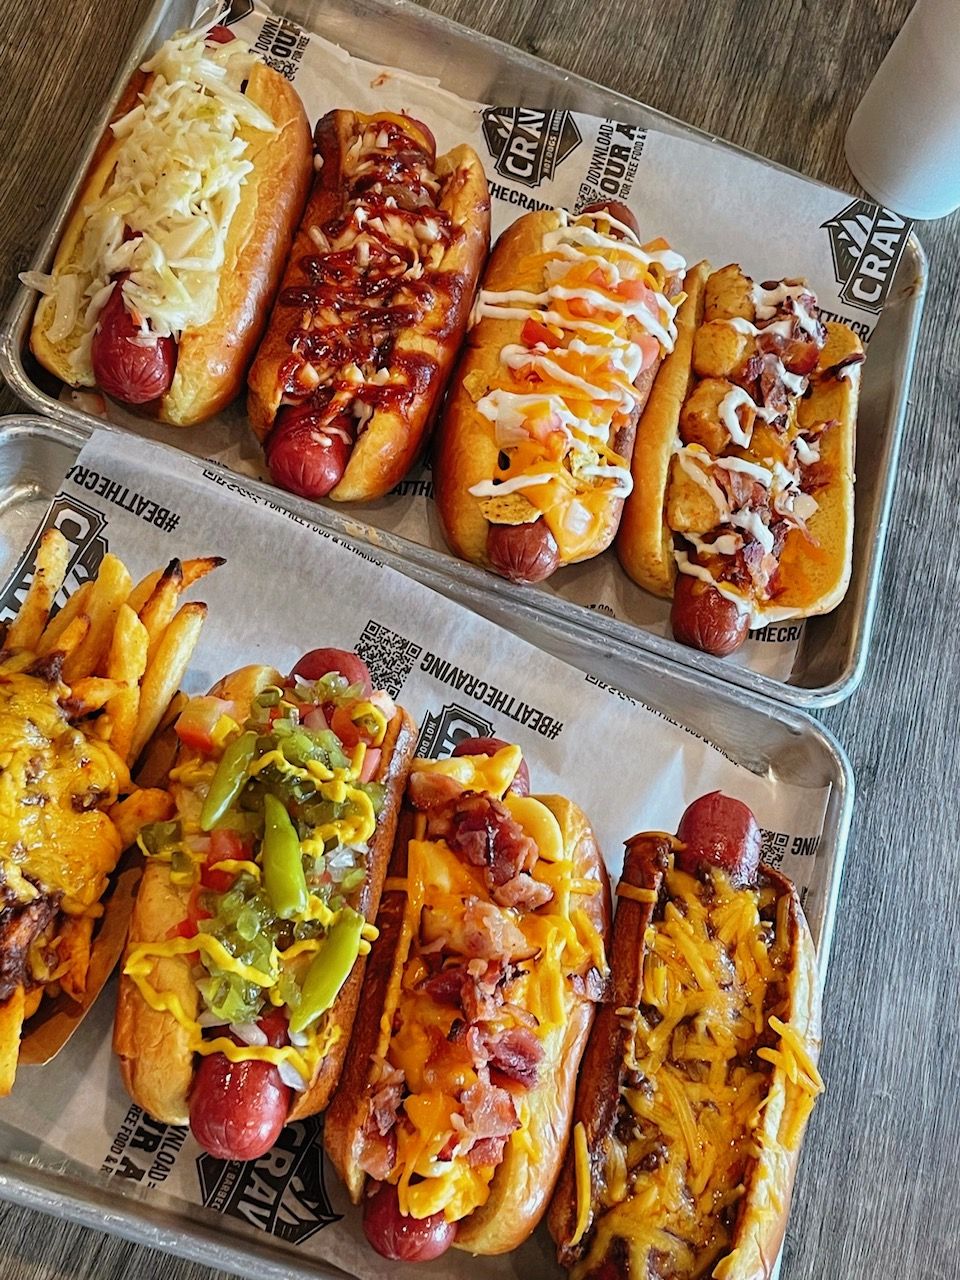 Crave Hot Dogs & BBQ Takes Michigan by Storm